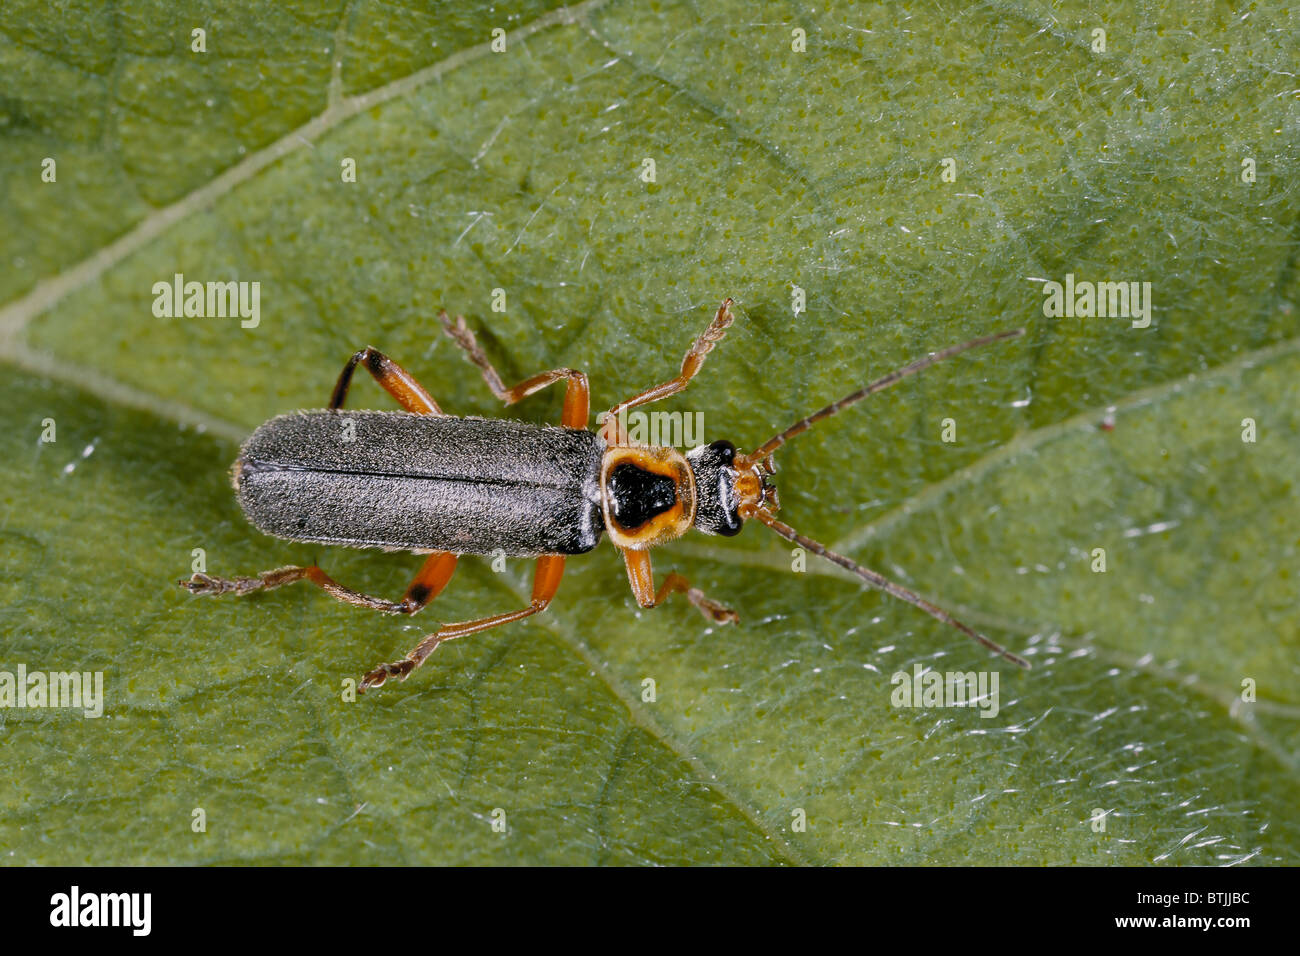 Soldier beetle, Cantharis rustica Stock Photo